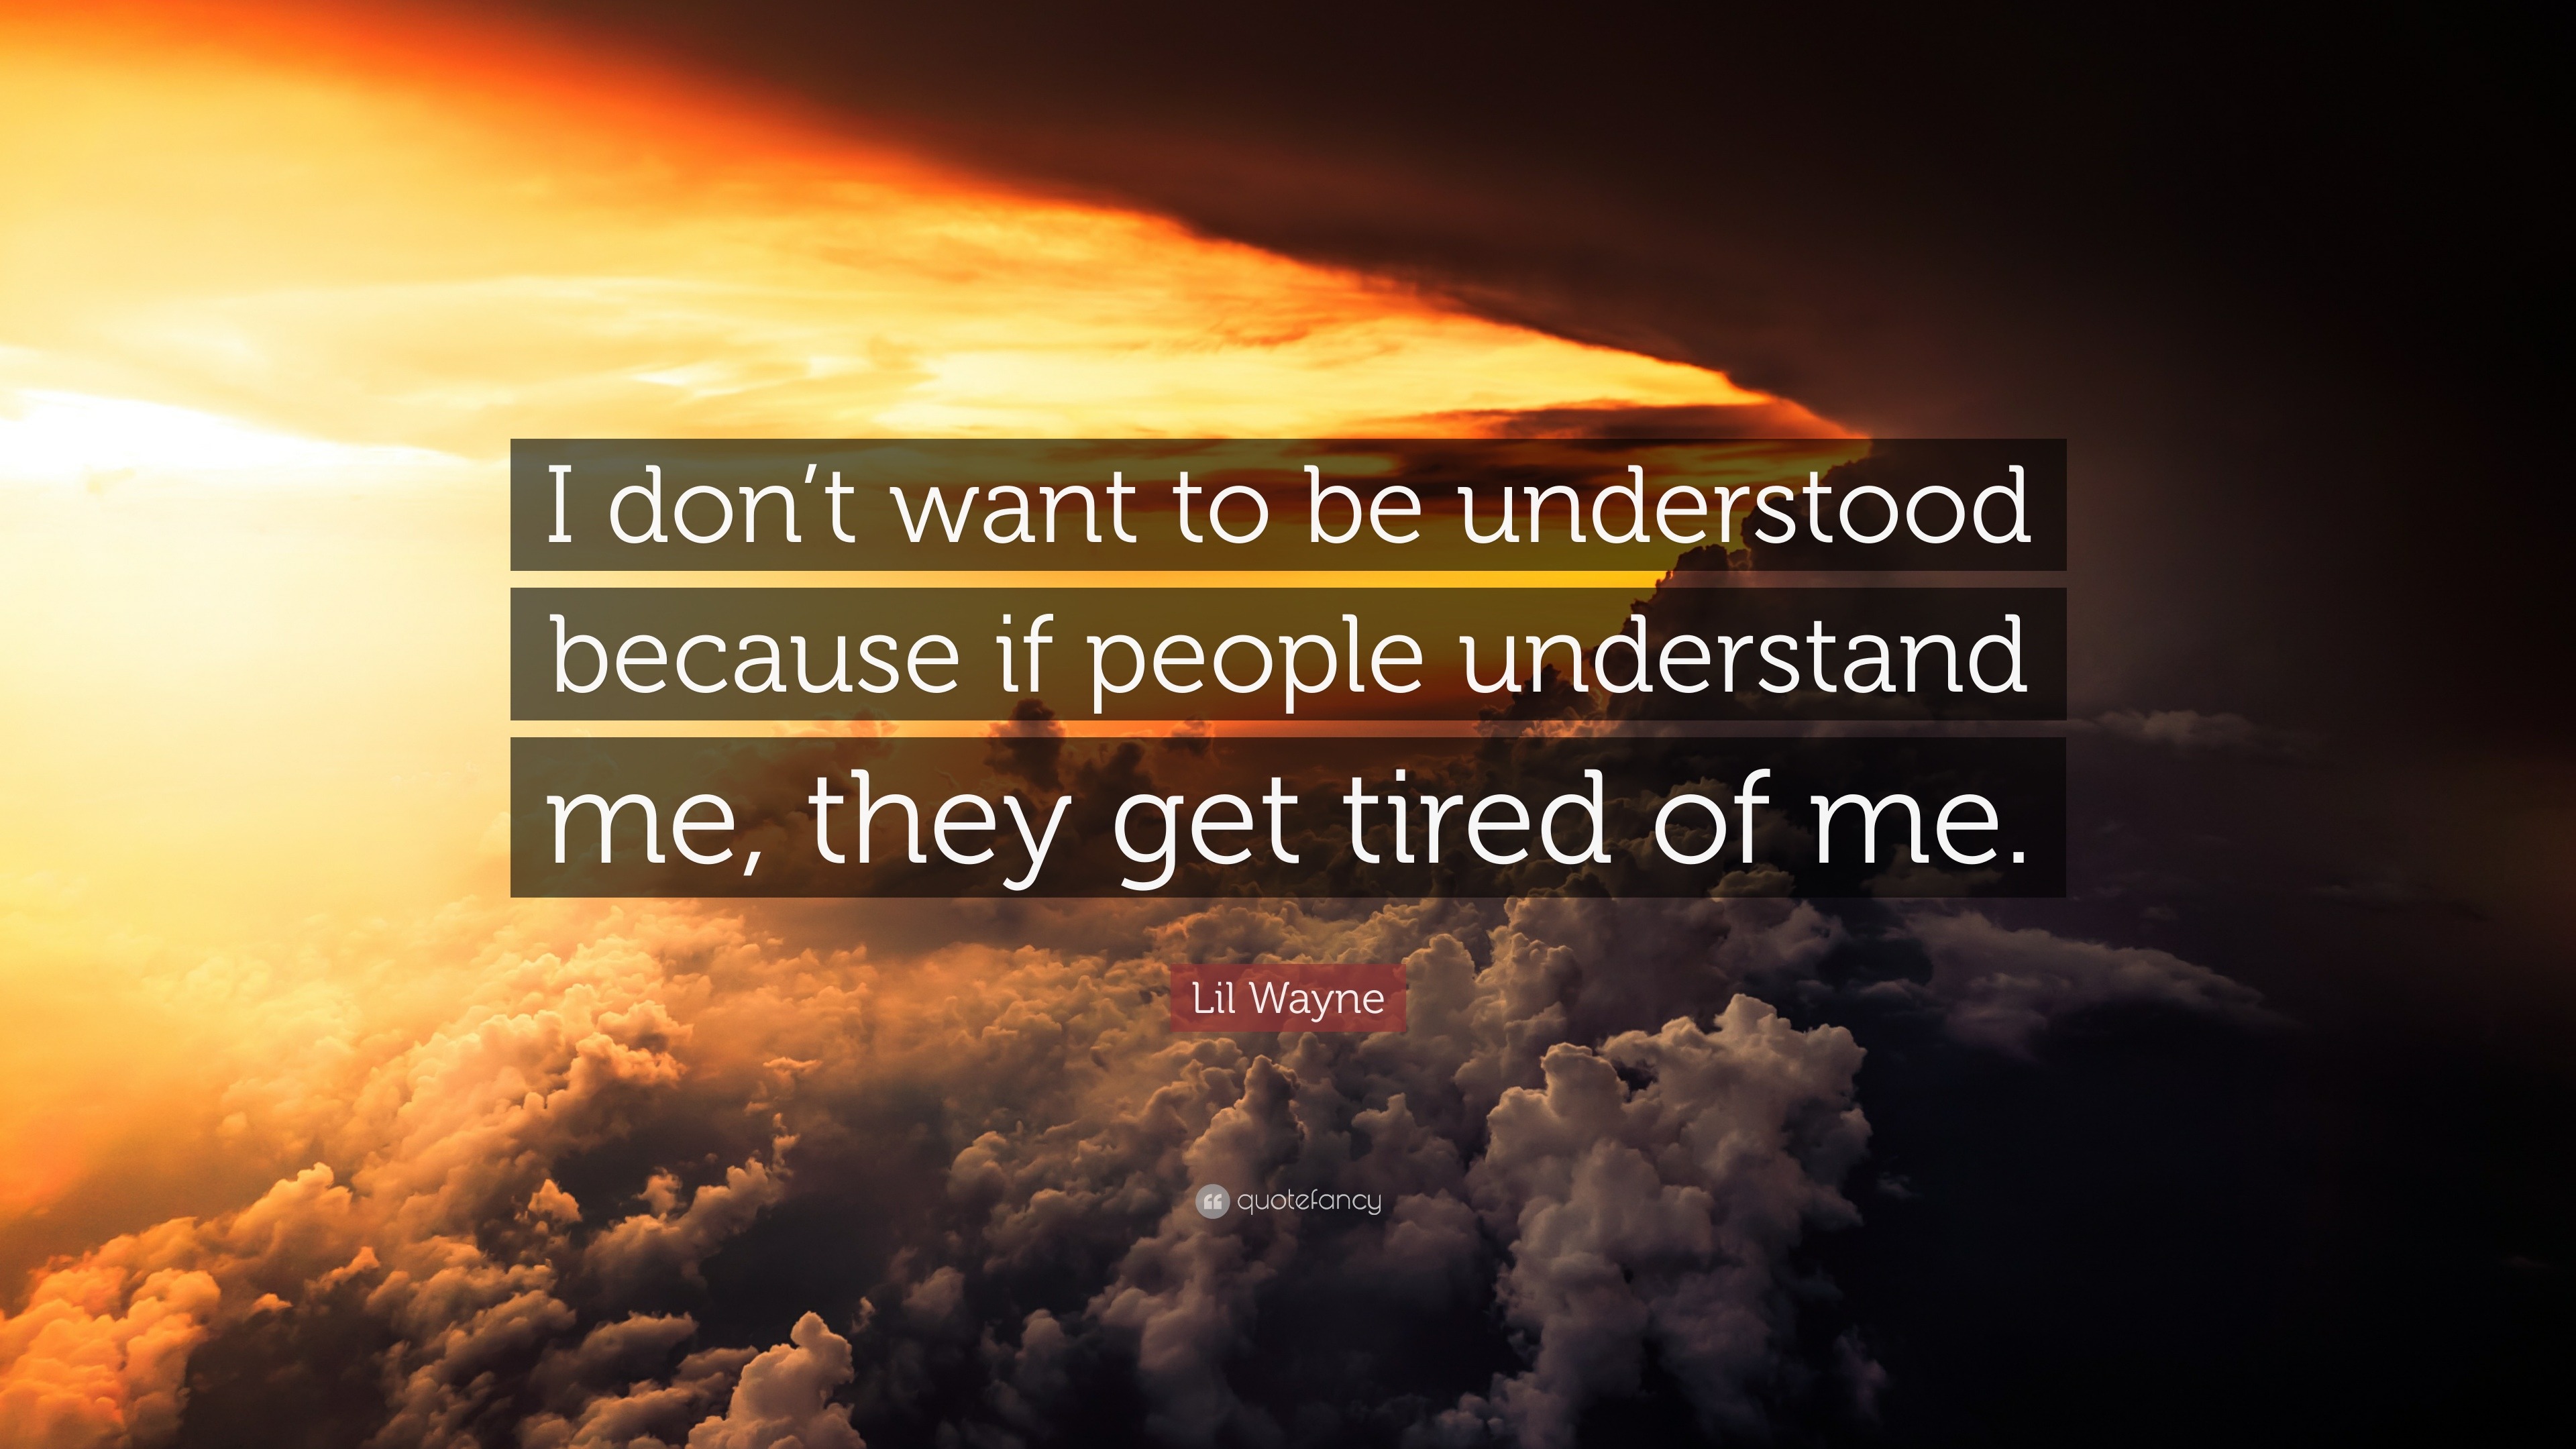 Lil Wayne Quote: “I don’t want to be understood because if people ...